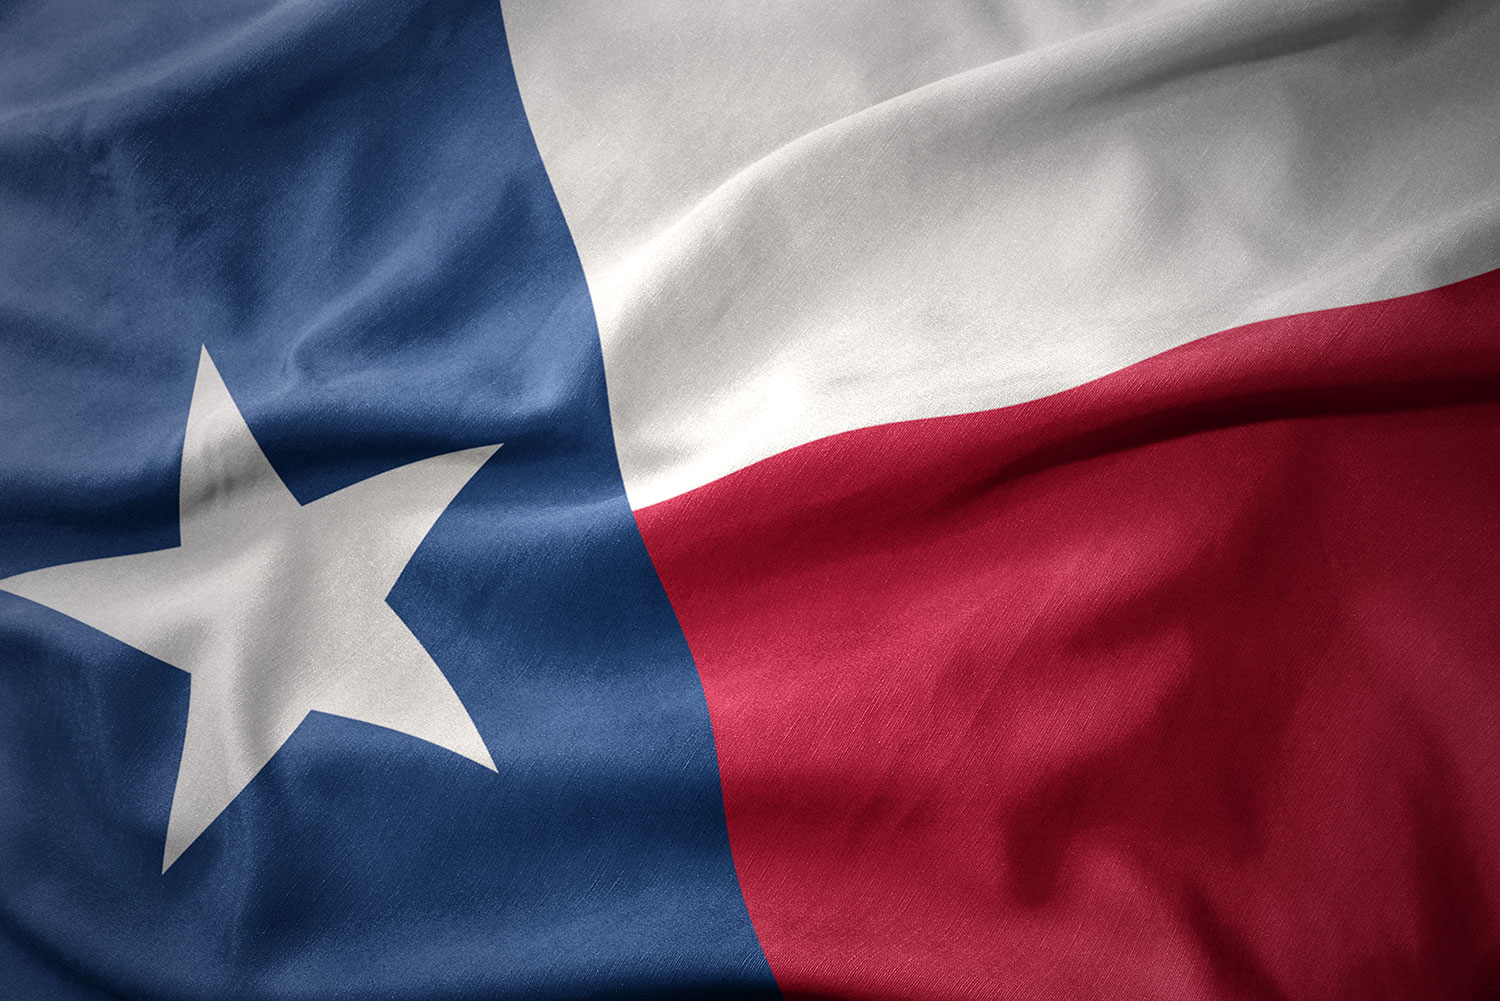 Close up of Texas state flag with a white star on a blue field next to wide white and red stripes